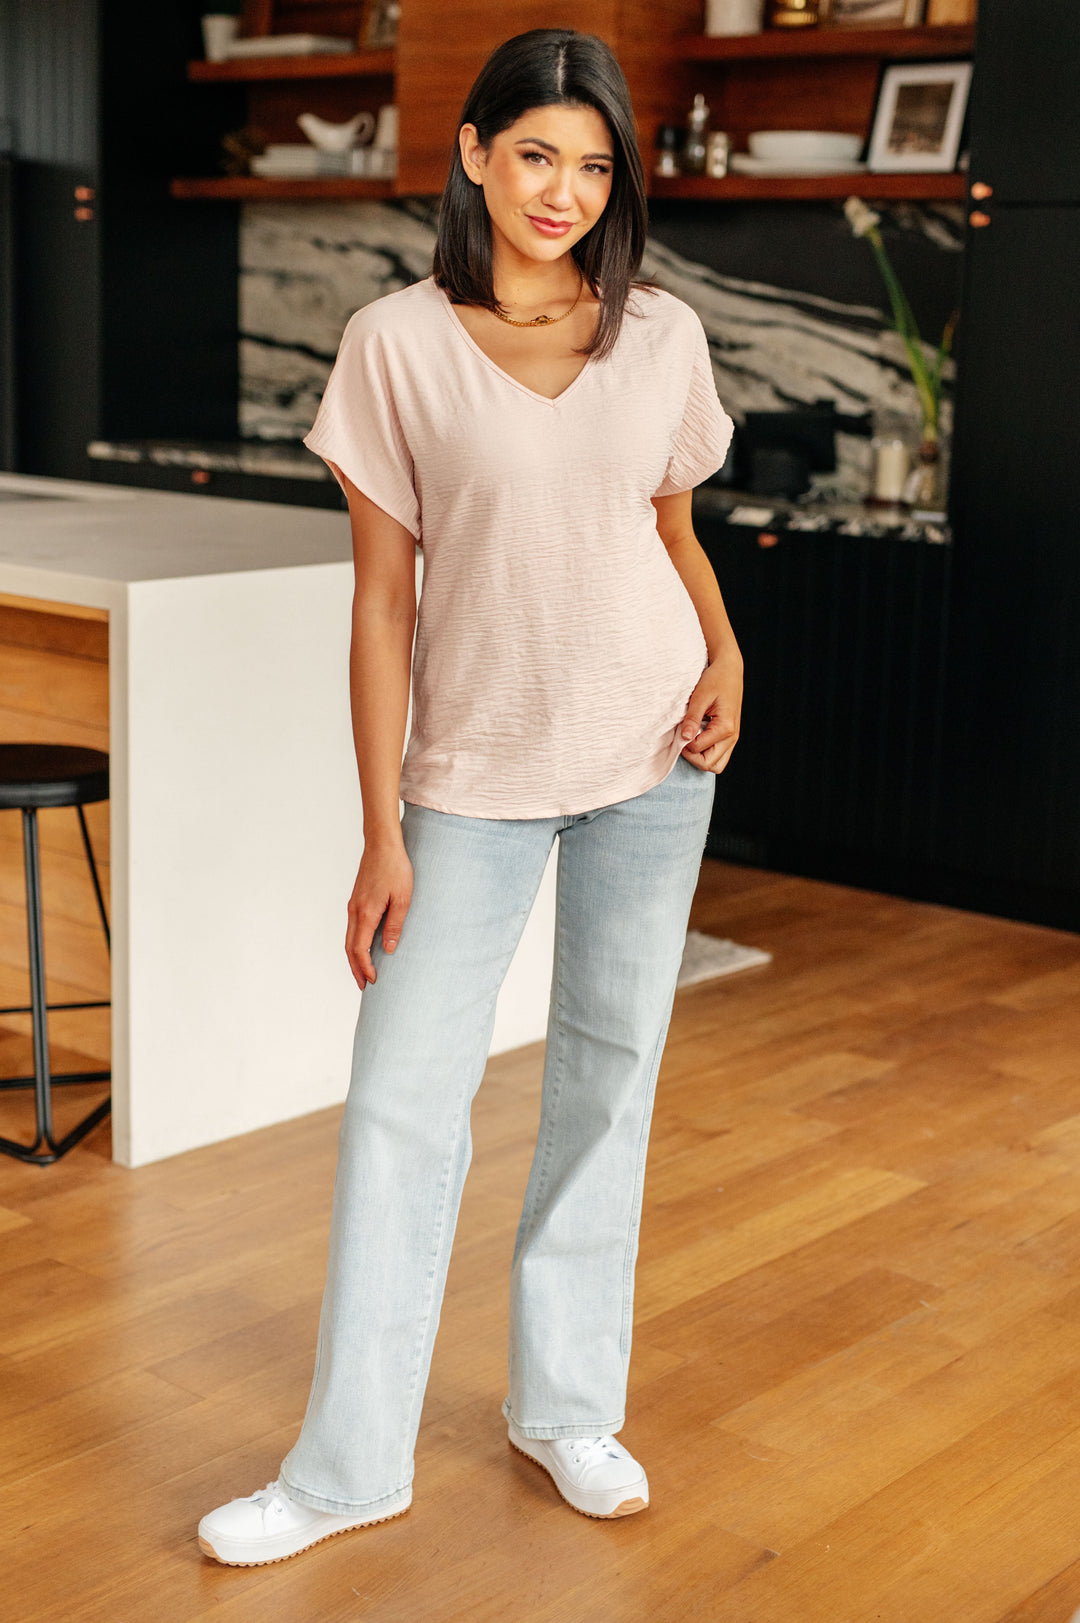 Frequently Asked Questions V-Neck Top in Blush-Short Sleeve Tops-Inspired by Justeen-Women's Clothing Boutique in Chicago, Illinois